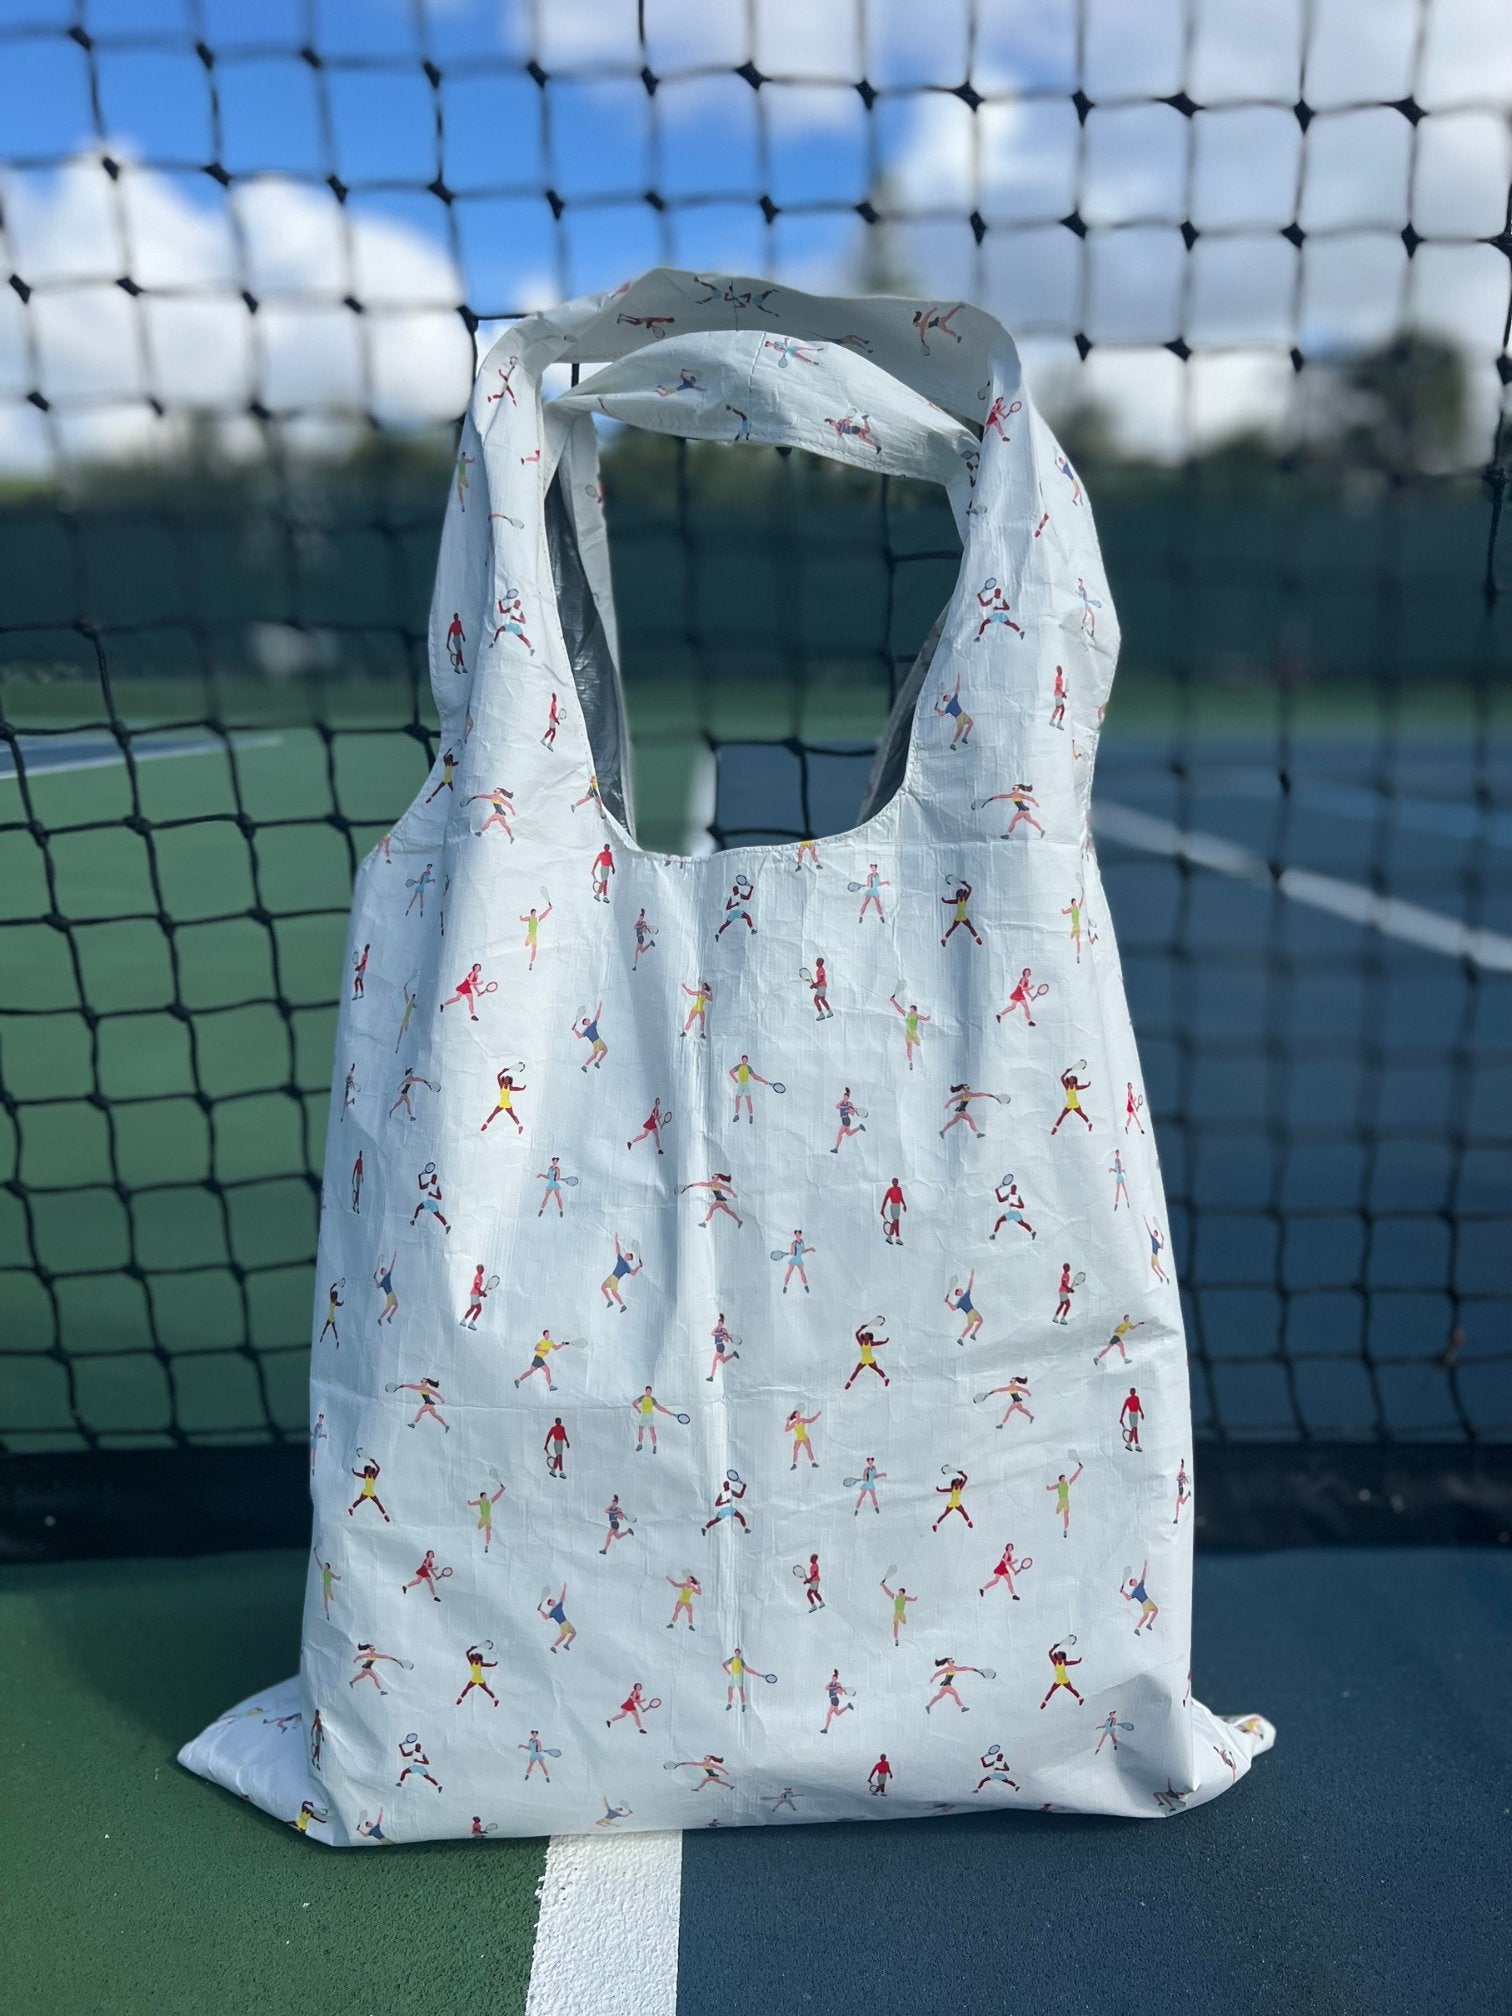 carryall tennis tote bag with tennis player fabric